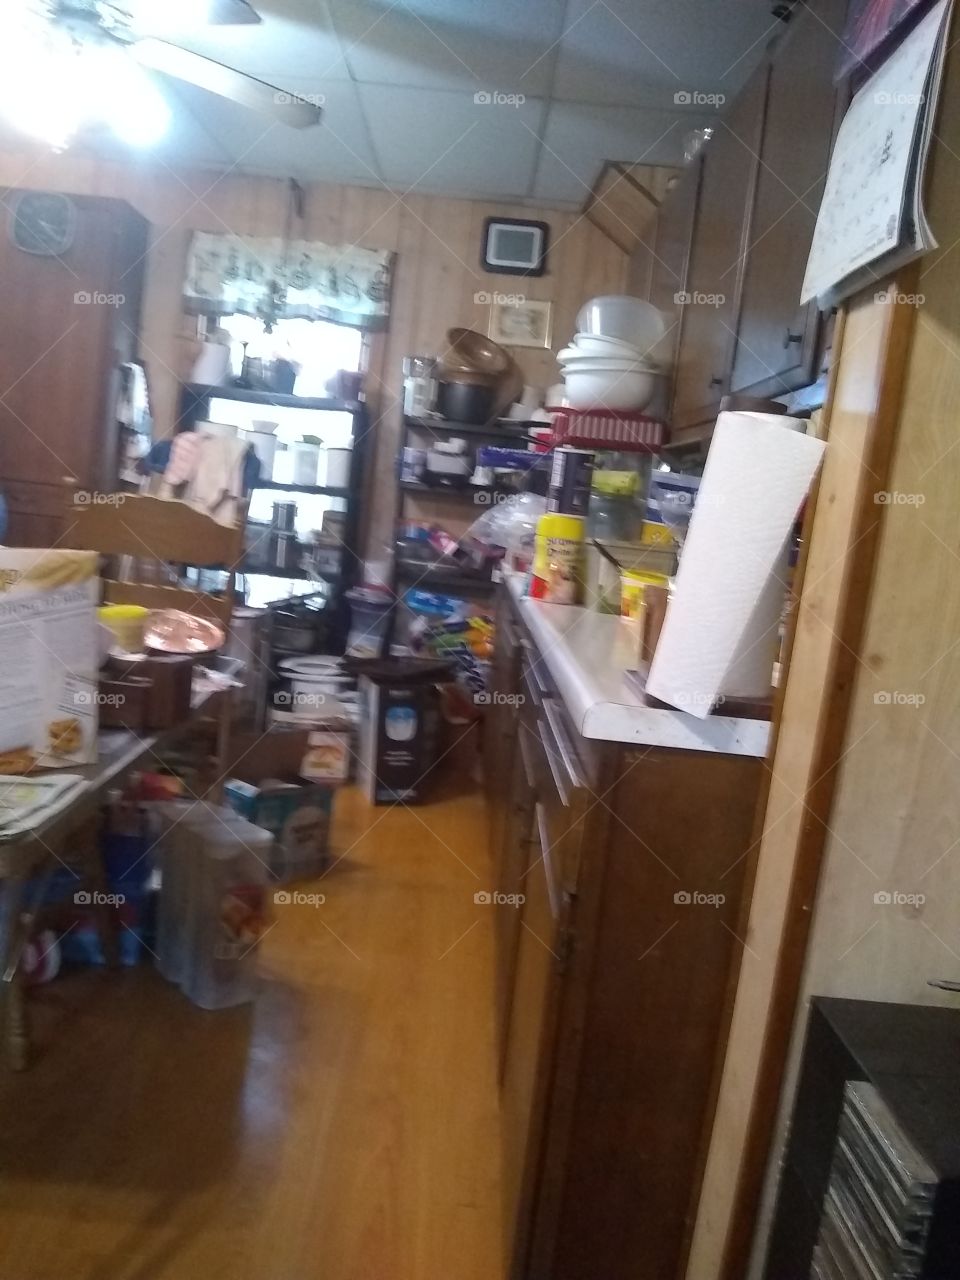 messy messy messy kitchen that will never get cleaned